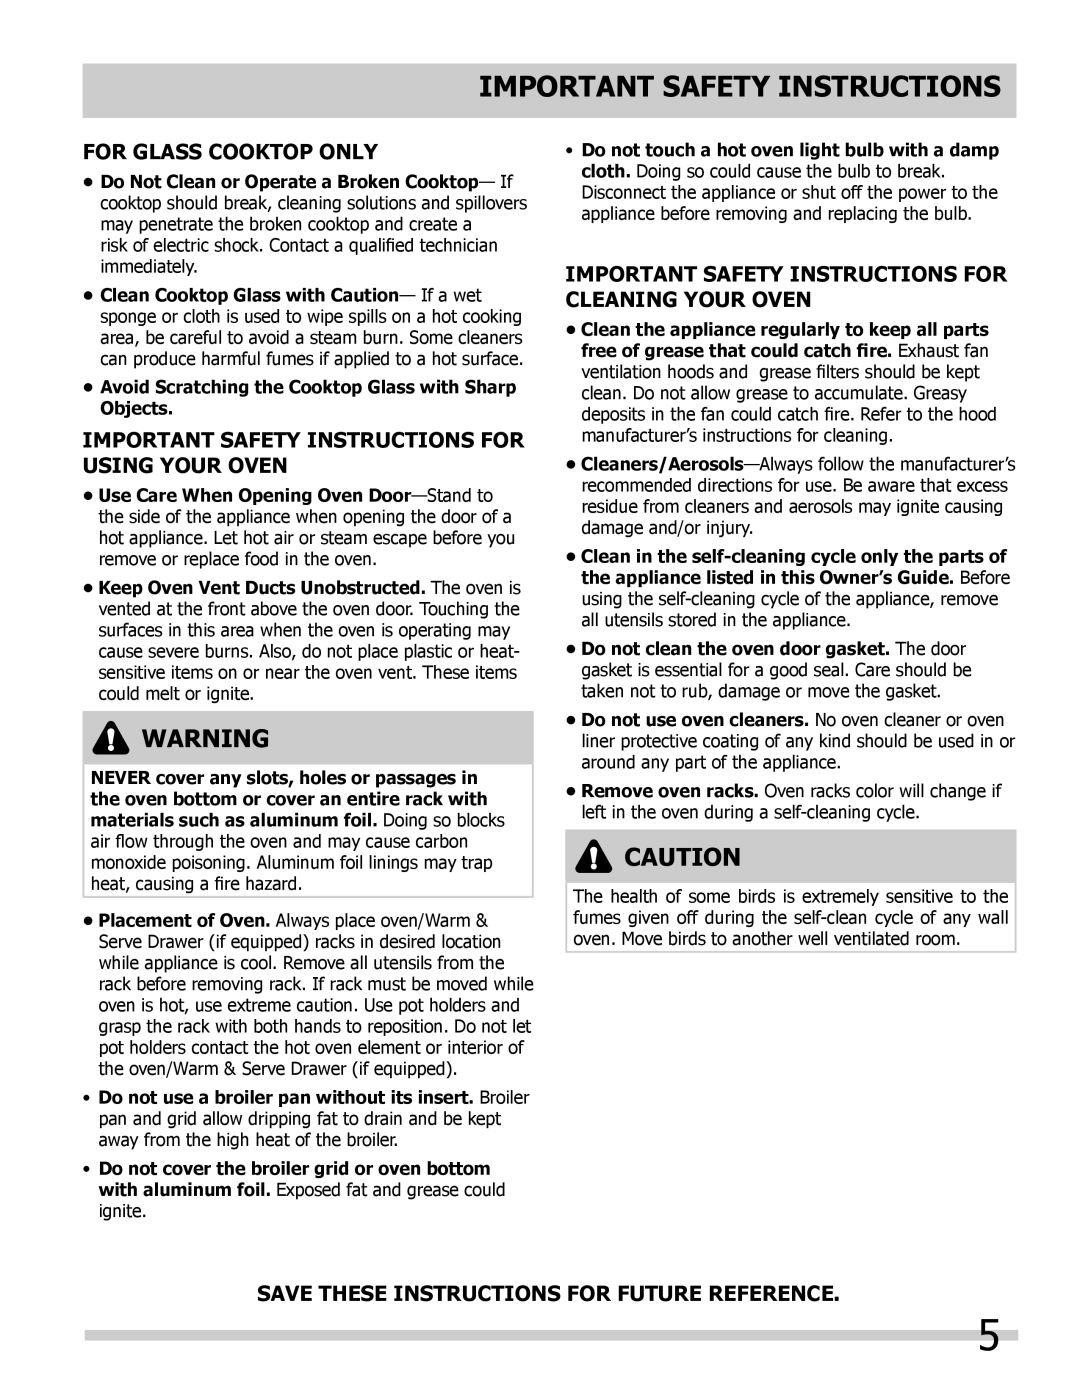 Frigidaire 318205205 manual For Glass Cooktop Only, Important Safety Instructions For Using Your Oven 